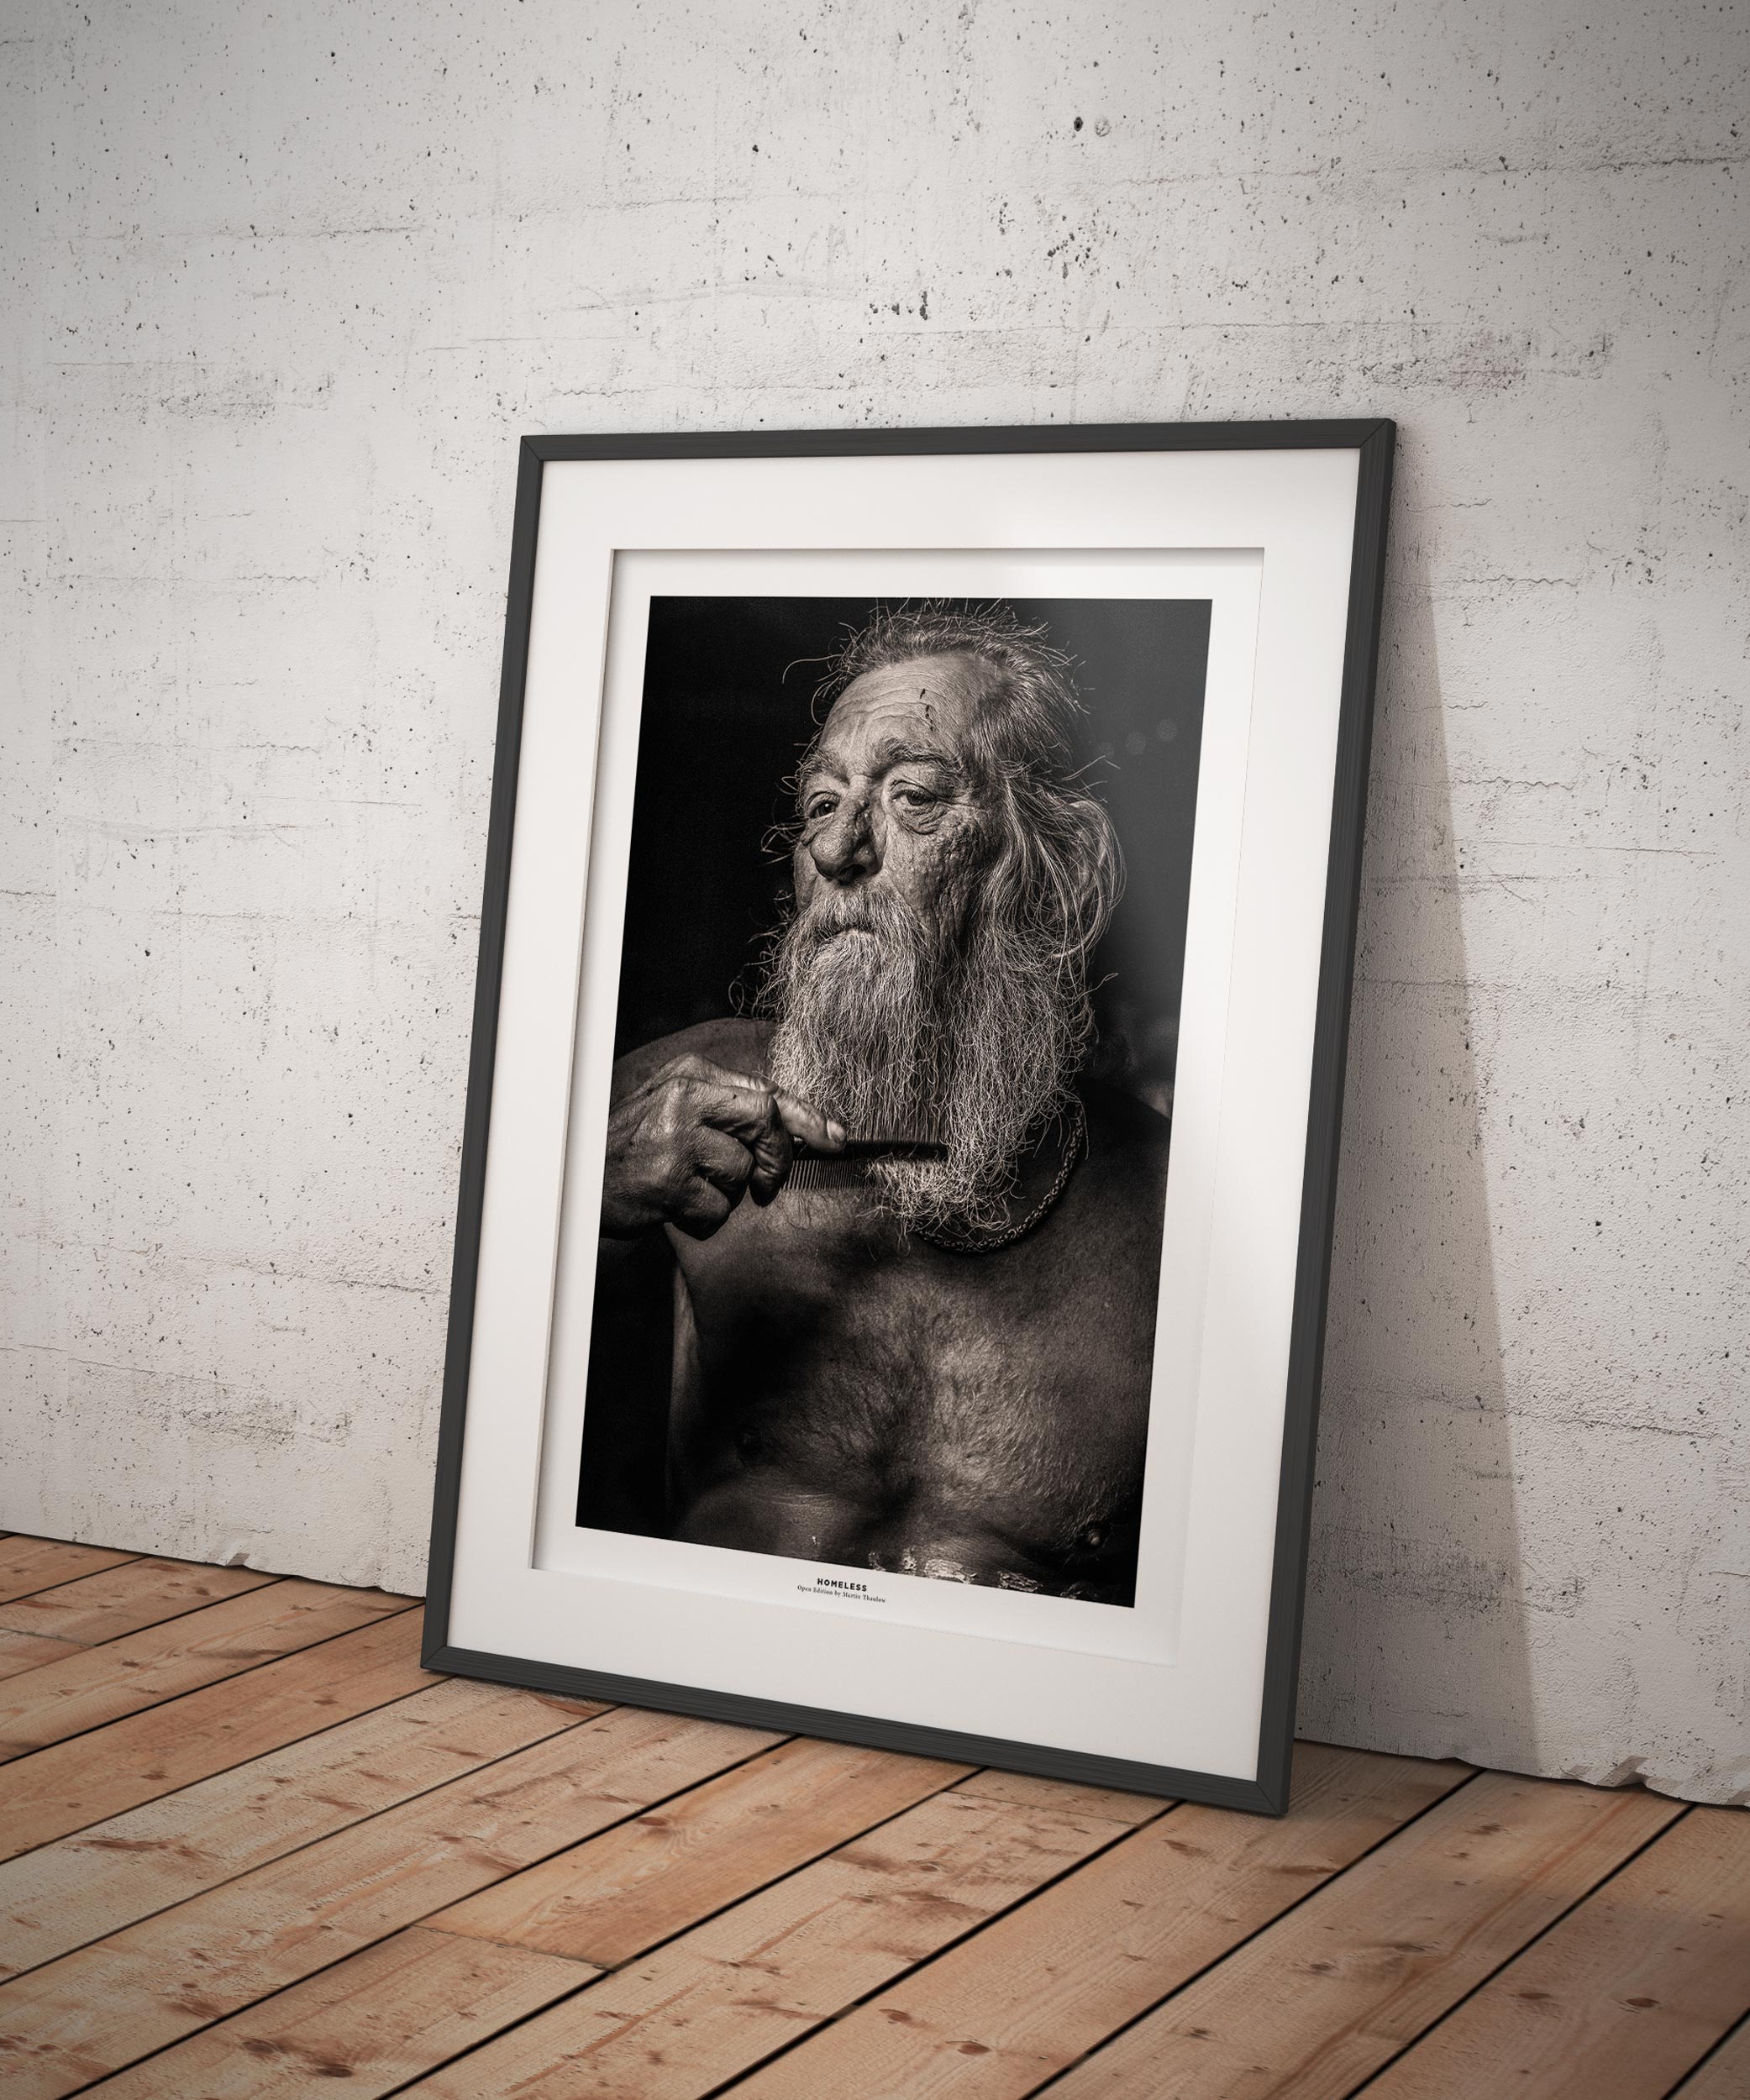 Homeless. Photo by photographer Martin Thaulow. Open Edition (seen in a frame in an environment. The frame is not part of sale). Buy high quality print.